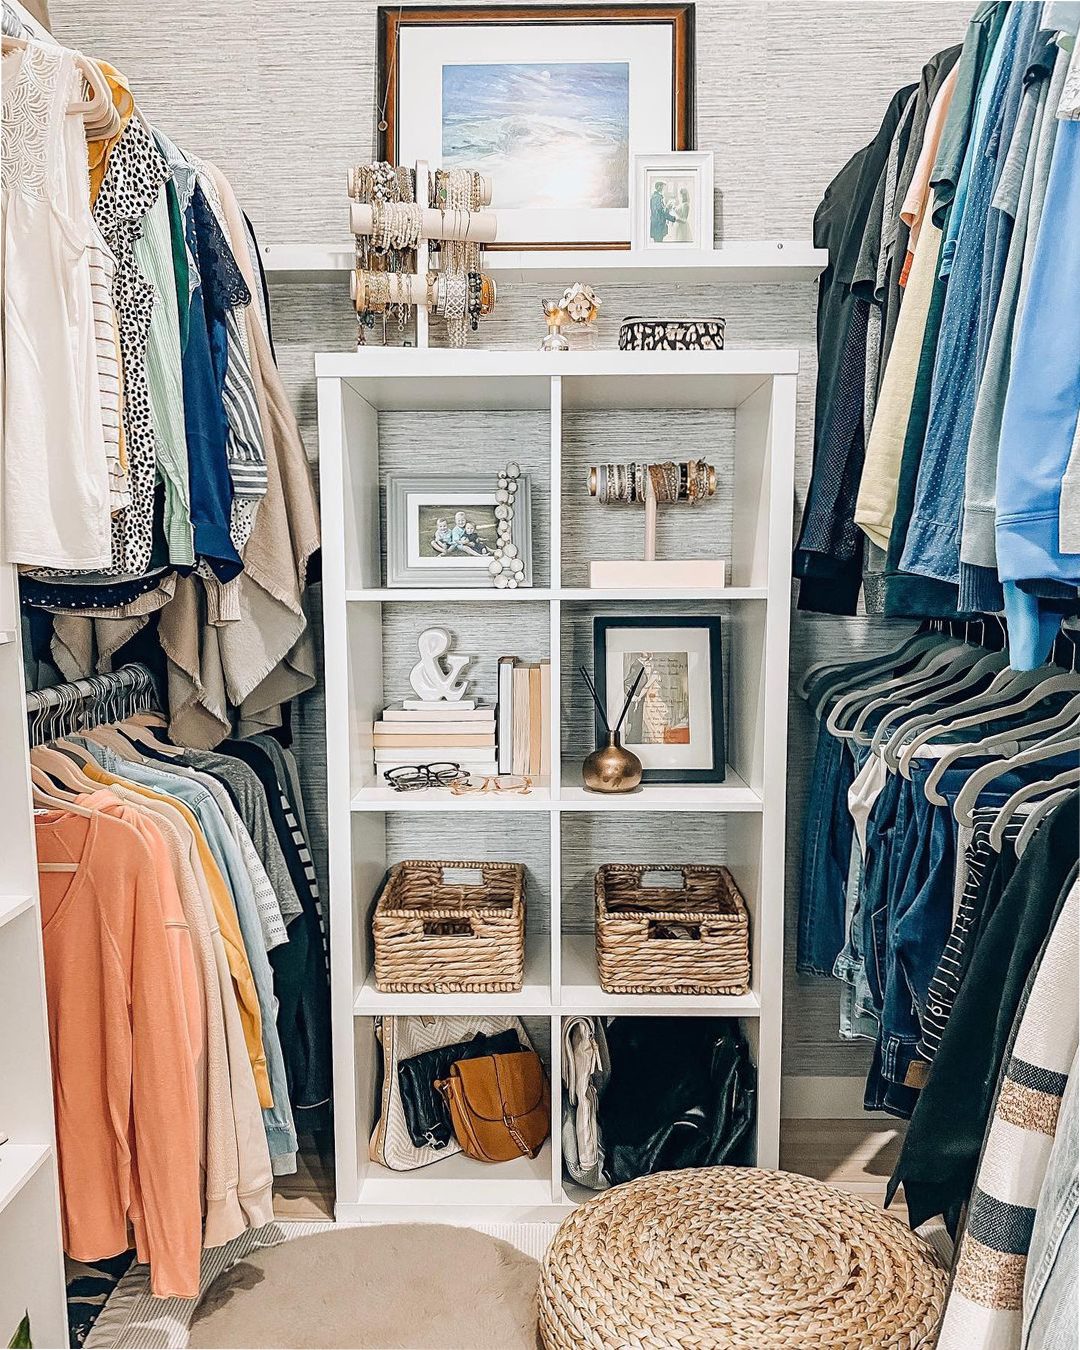 How to Organize a Walk-In Closet